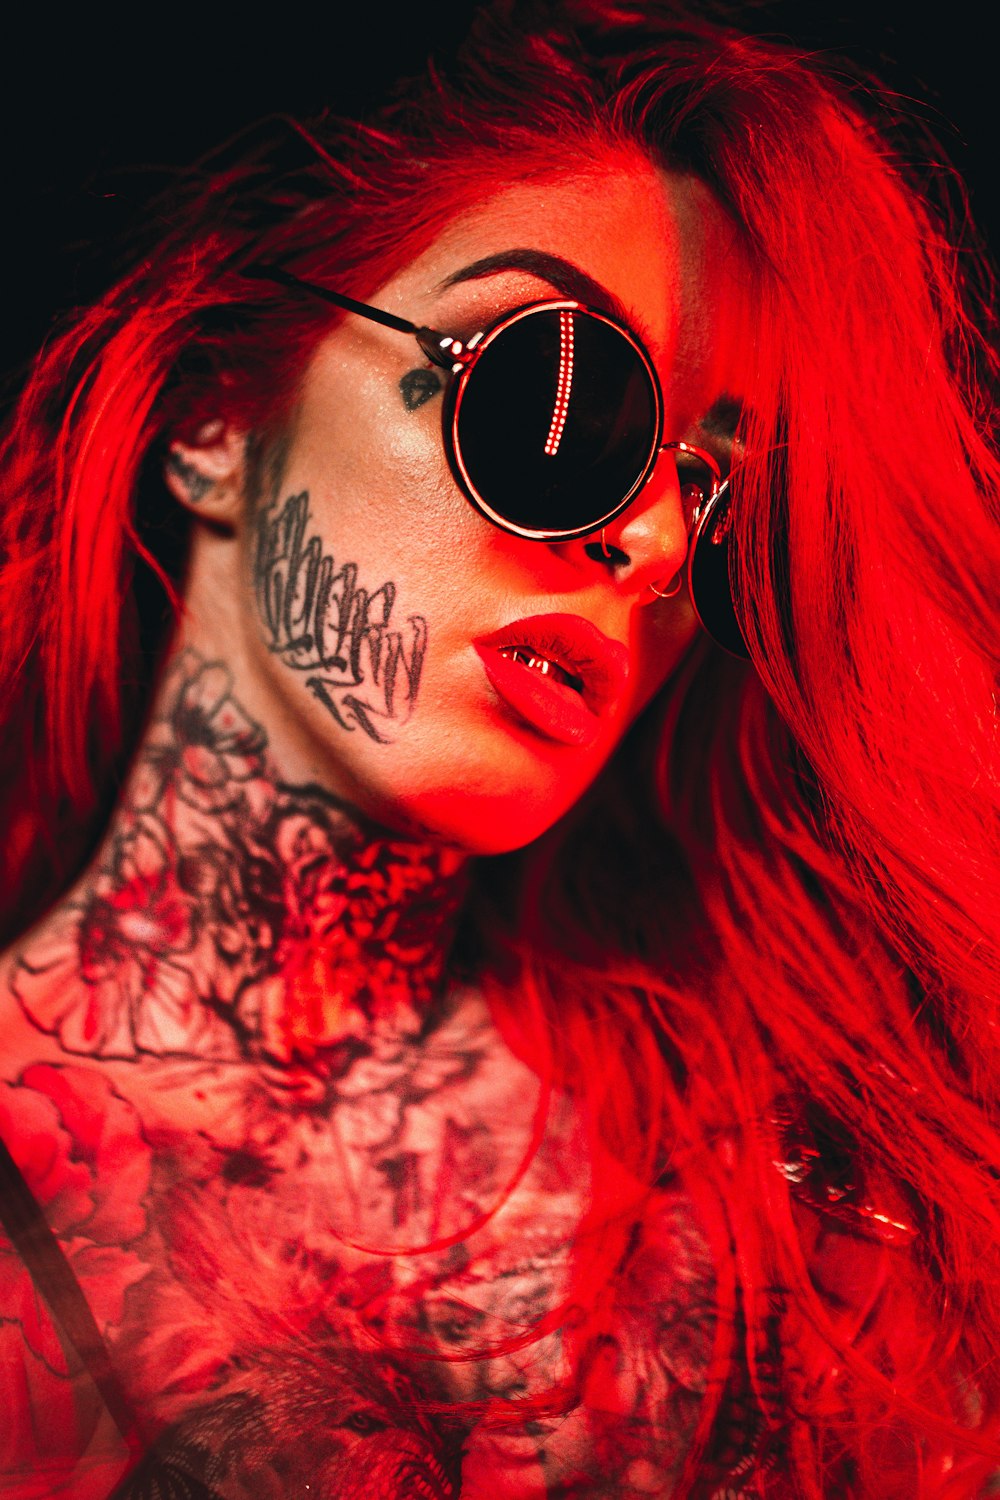 350+ Tattoo Girl Pictures | Download Free Images on Unsplash